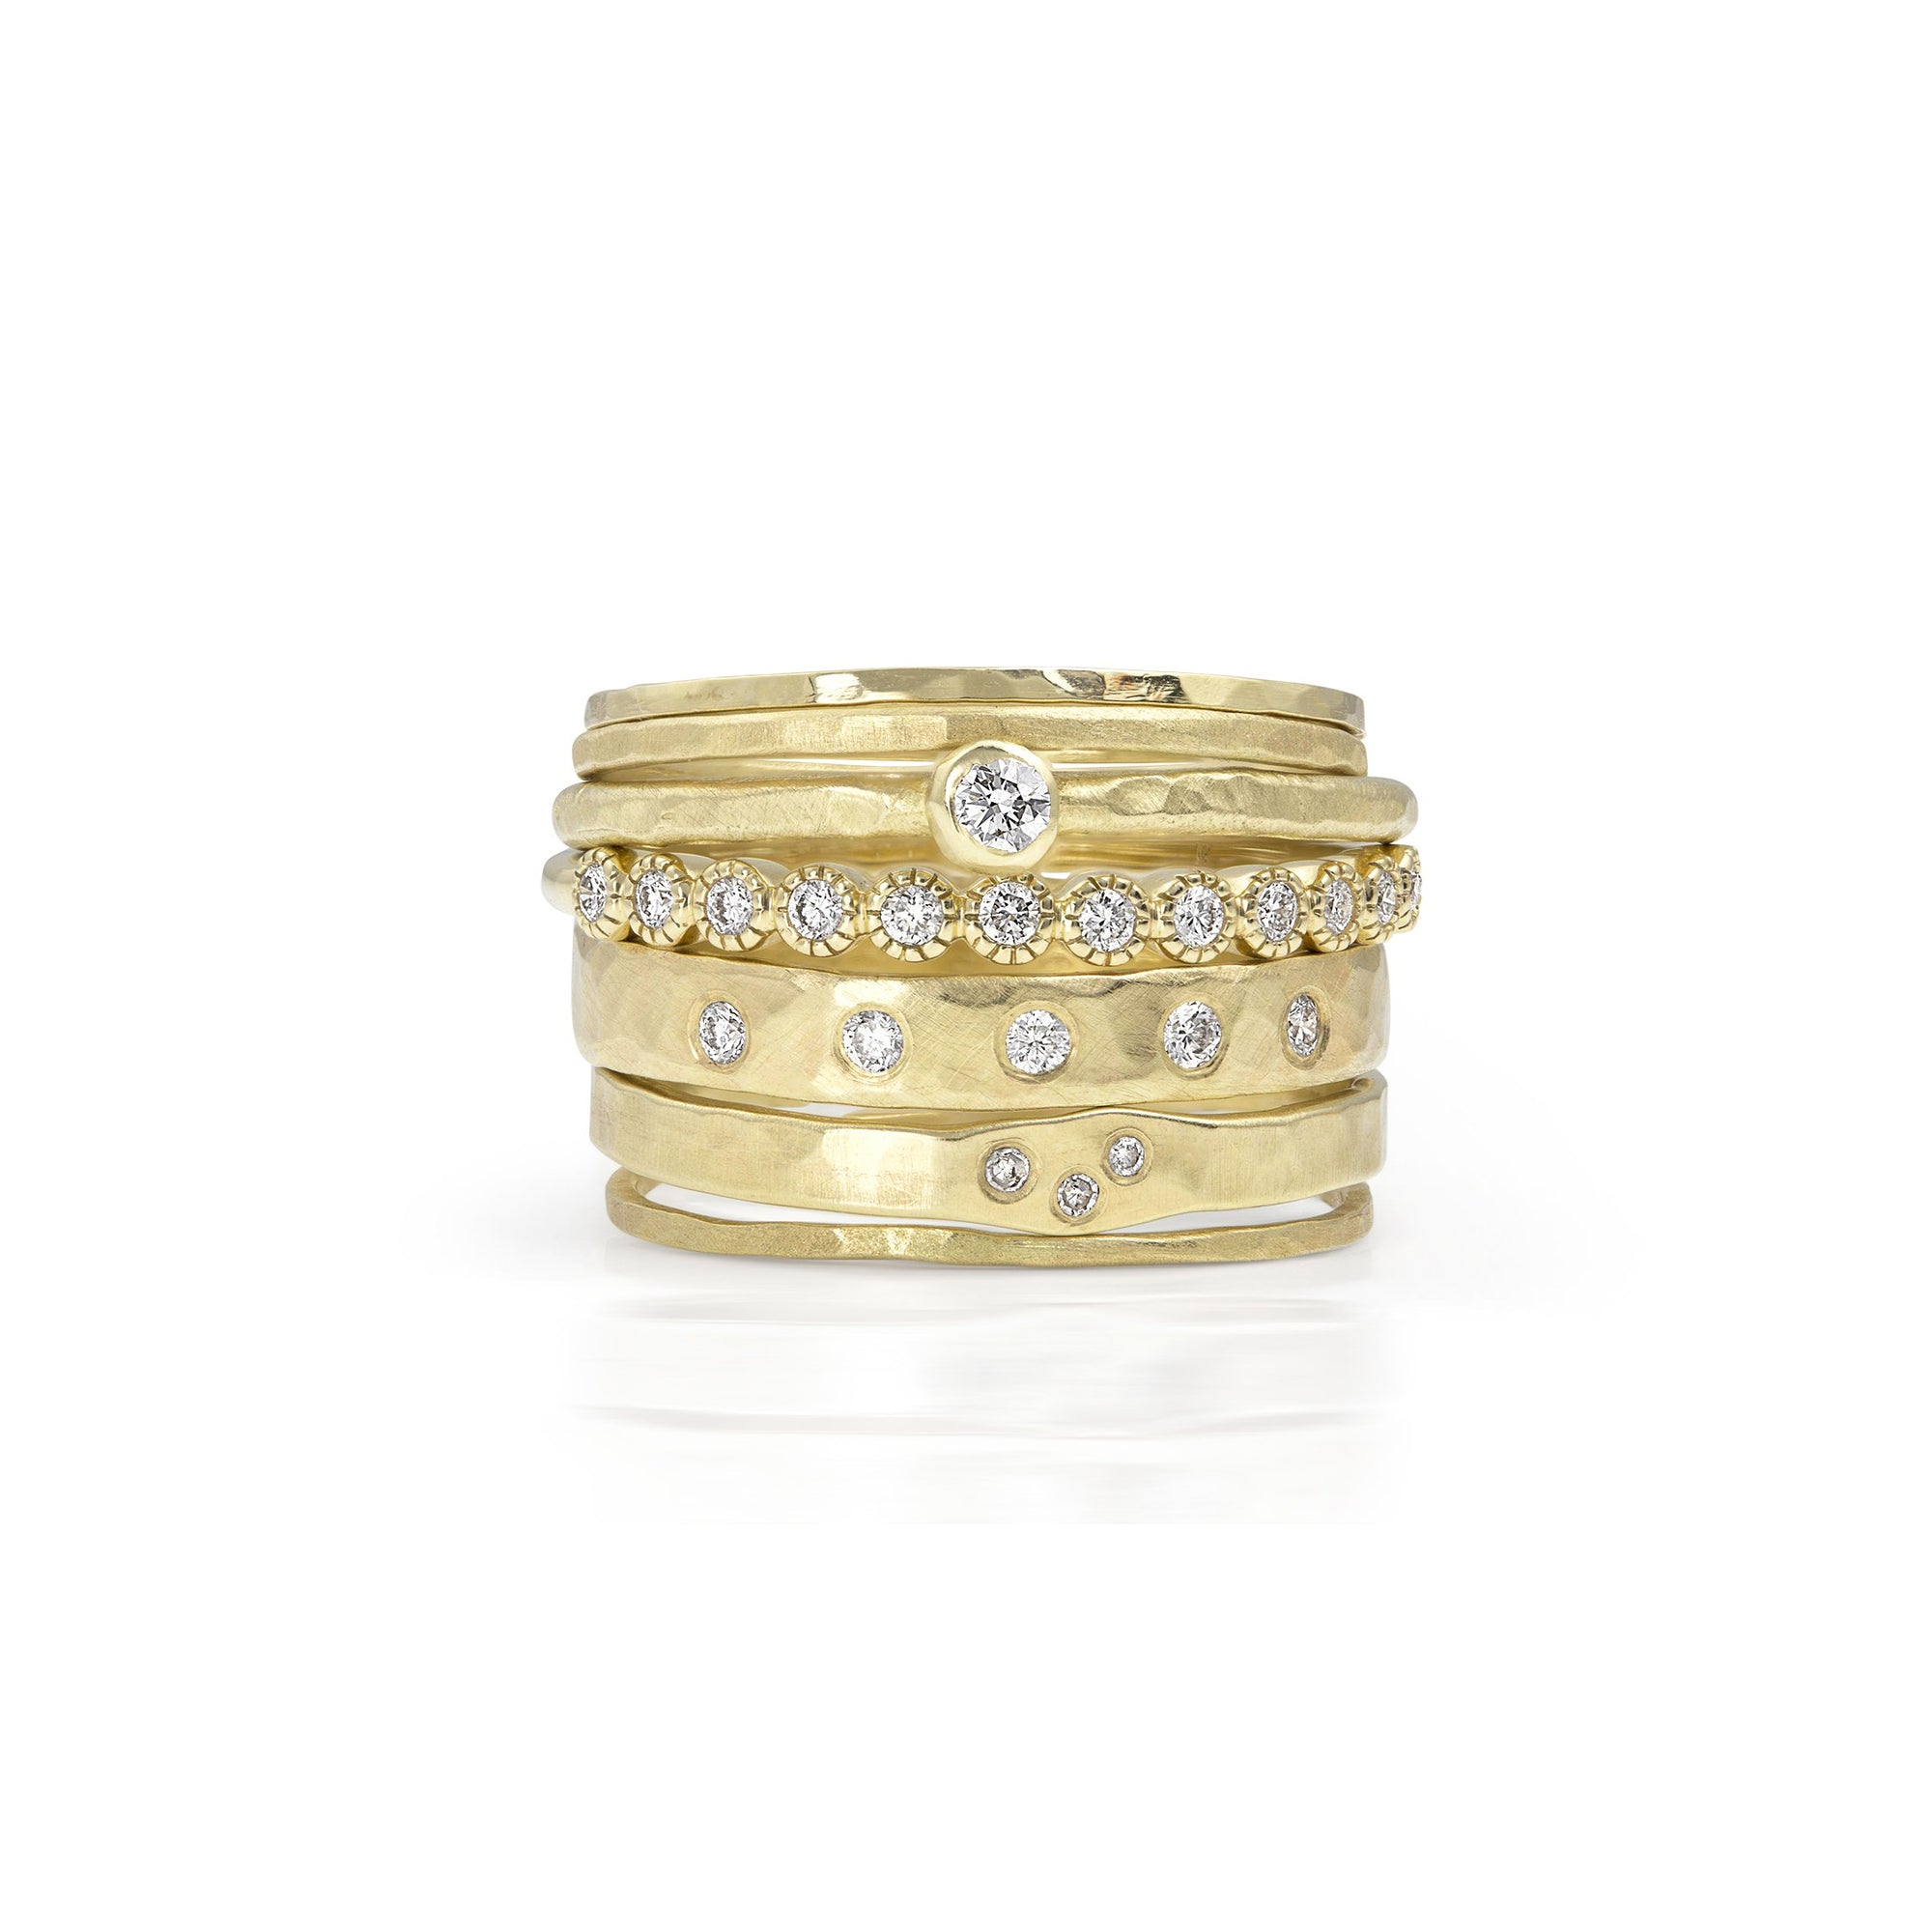 14k gold stack of favorites from the Julez Bryant ring collection